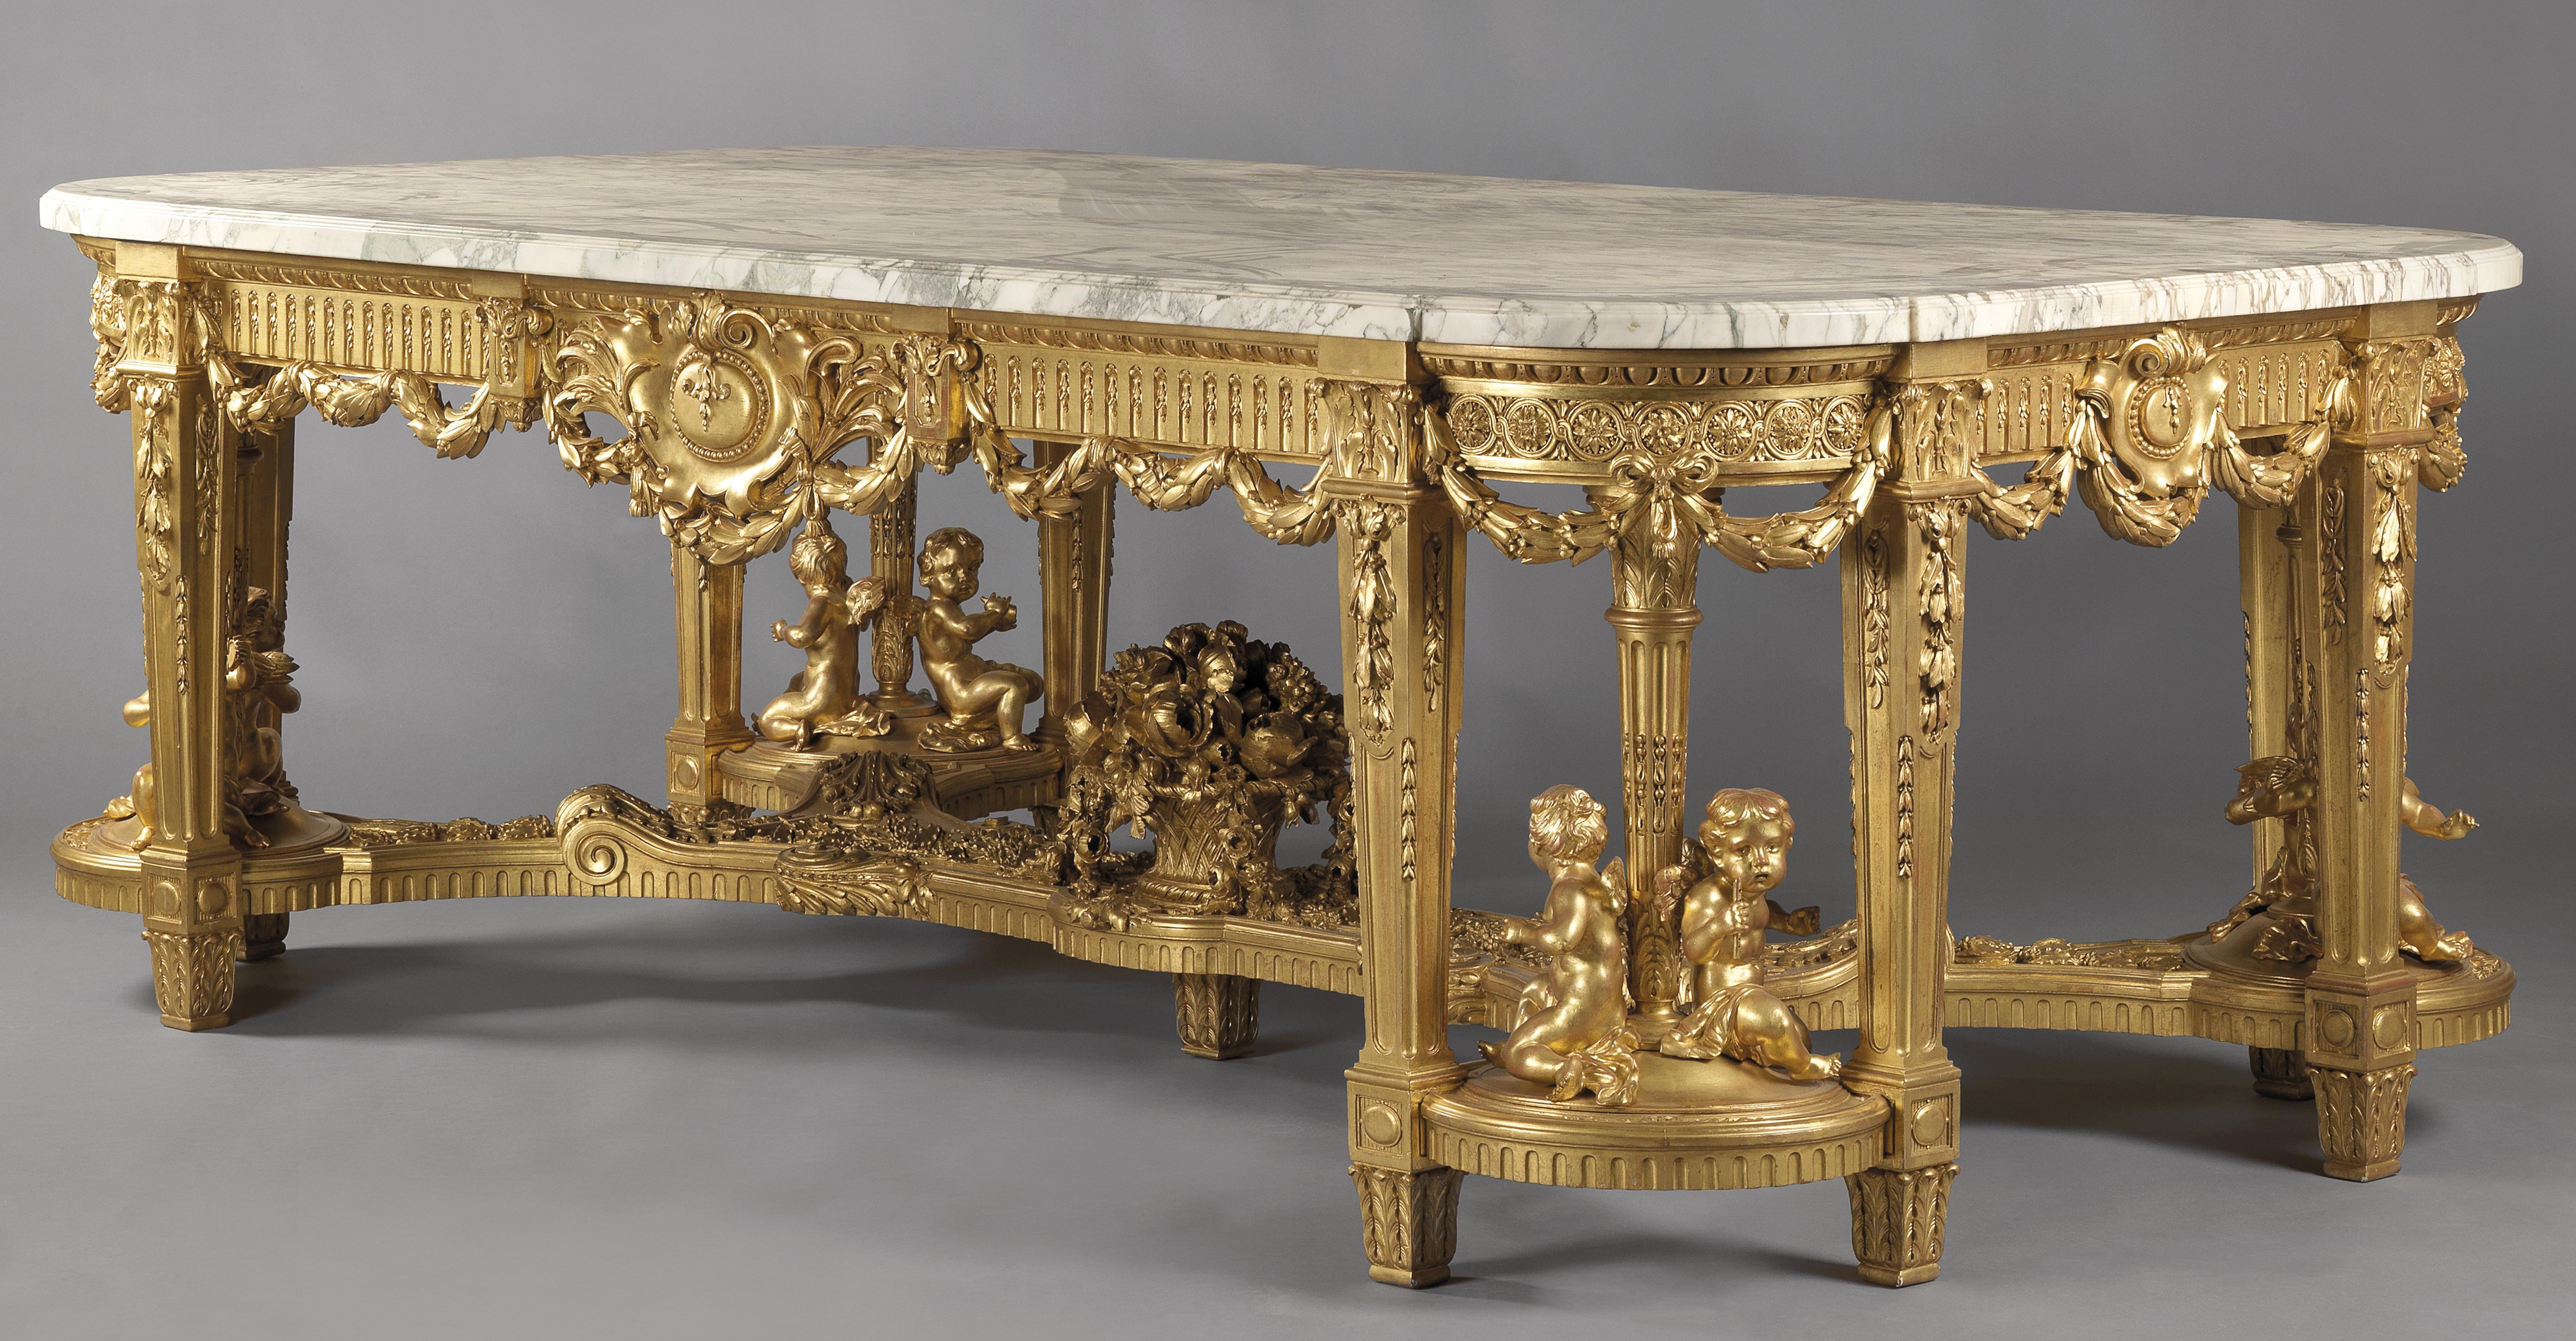 A unique monumental Louis XVI Style giltwood centre table with a Brèche Violette marble top by François Linke.

French, circa 1914.

Giltwood furniture by Linke is not only rare, but can be difficult to identify as it tends to be unmarked. This